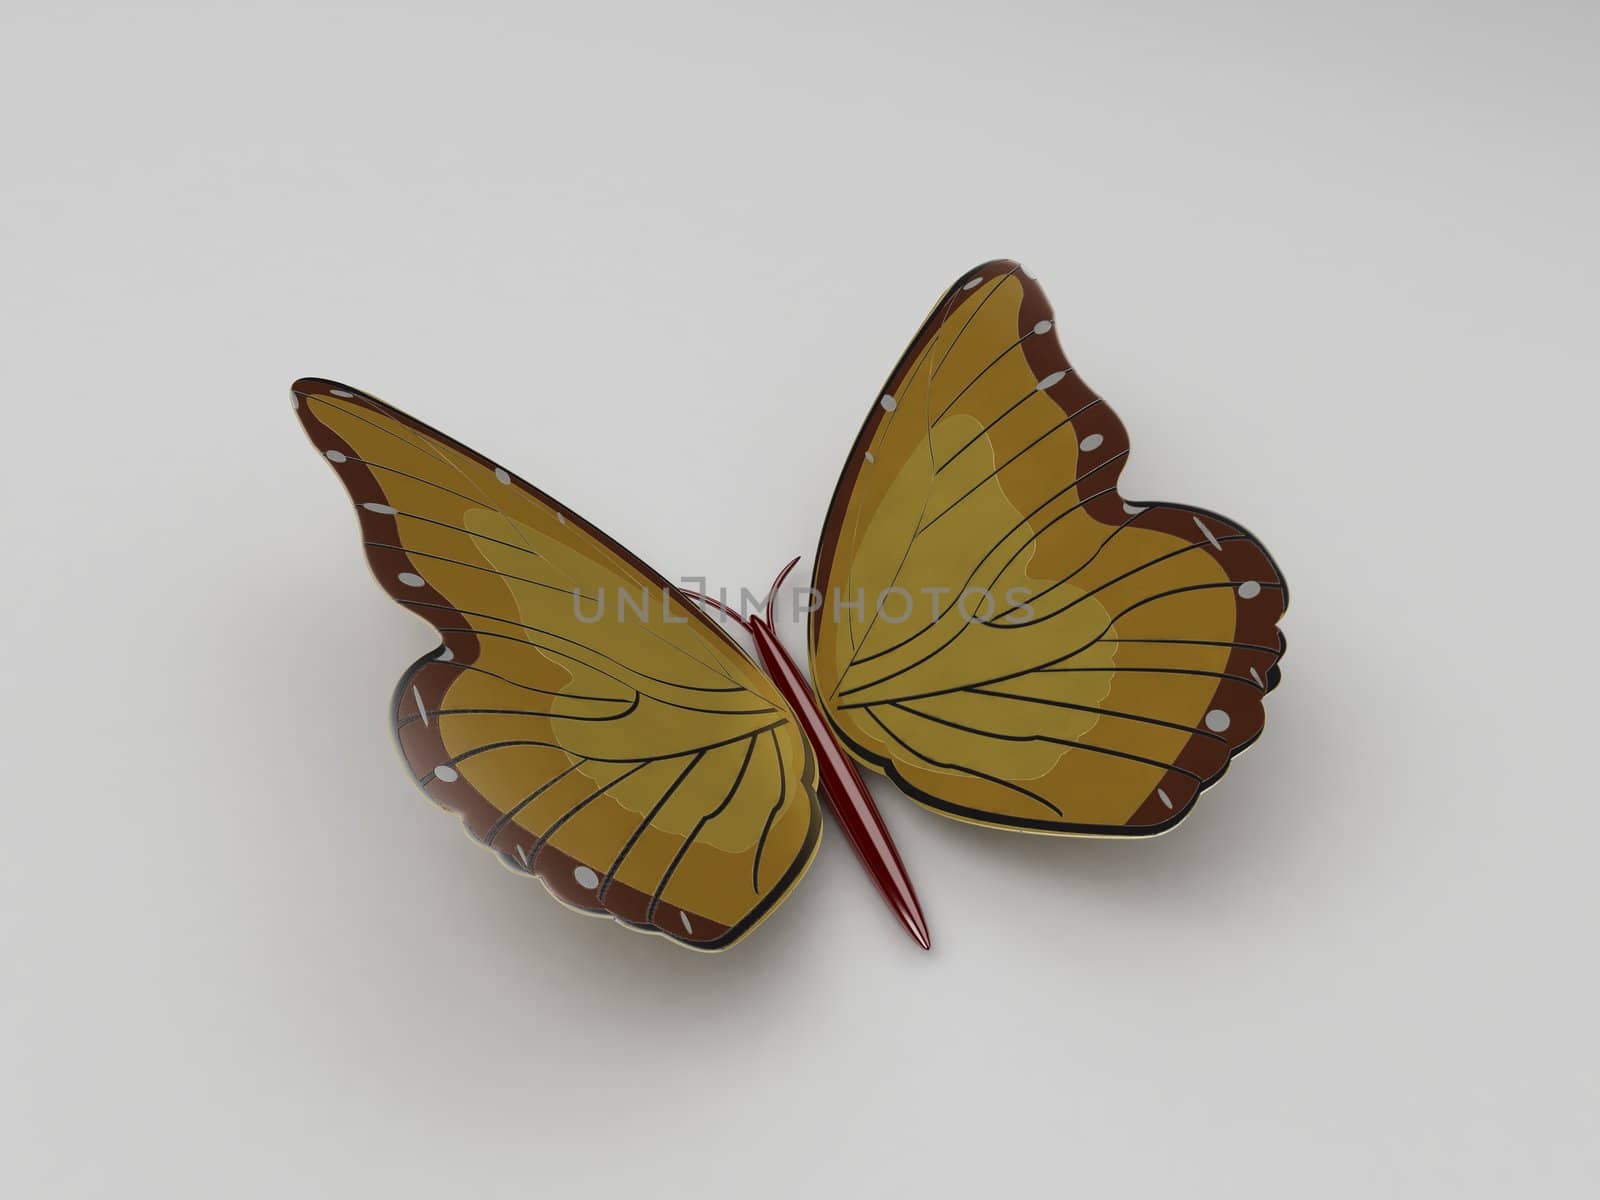 aerial view of three dimensional butterfly